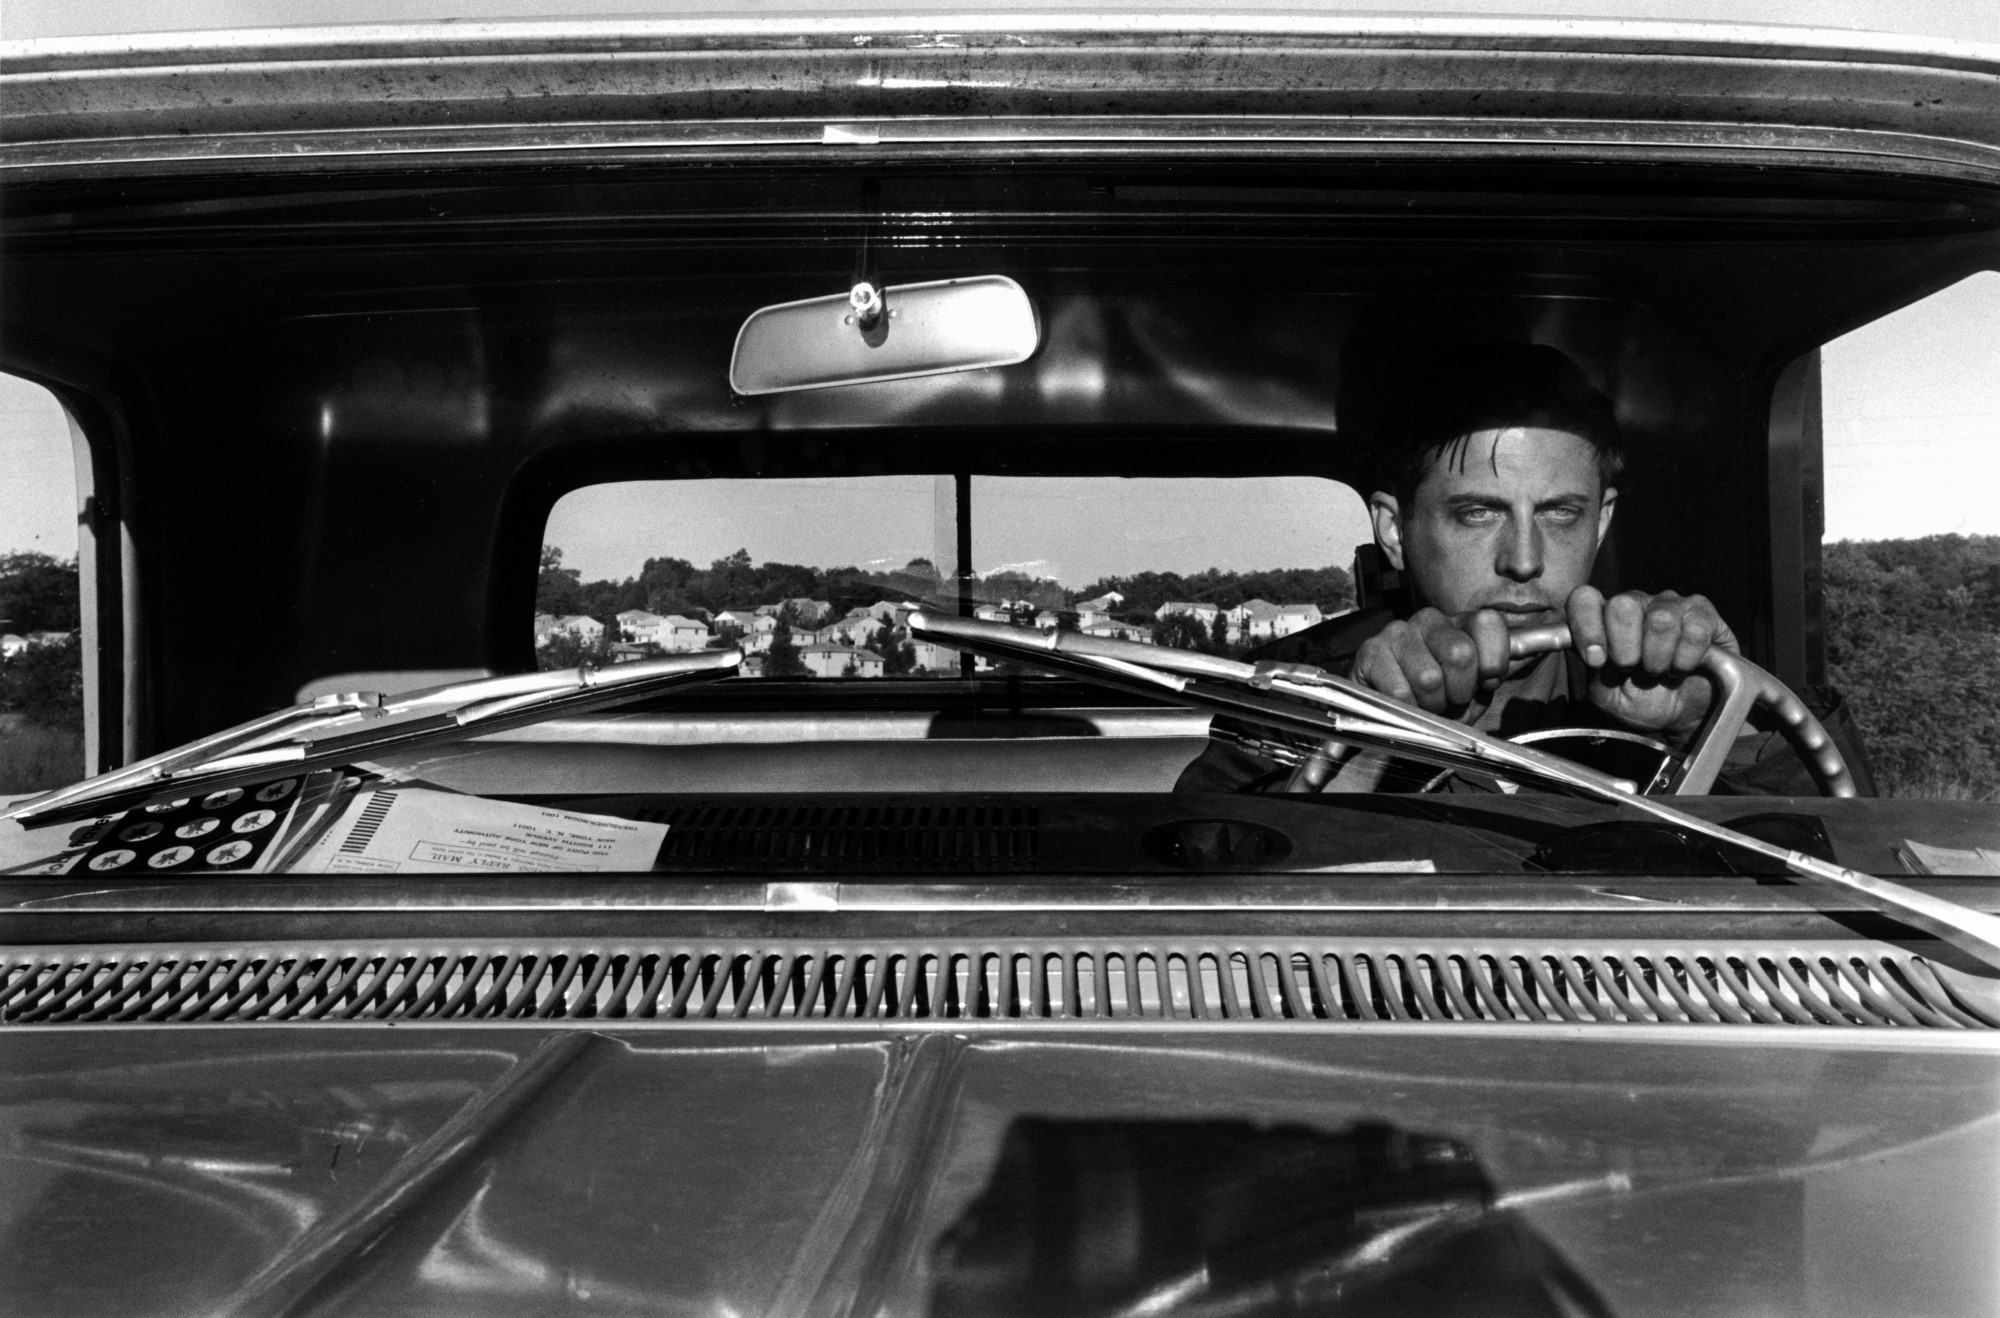 LEE FRIEDLANDER: "Out of the Cool" (1991)